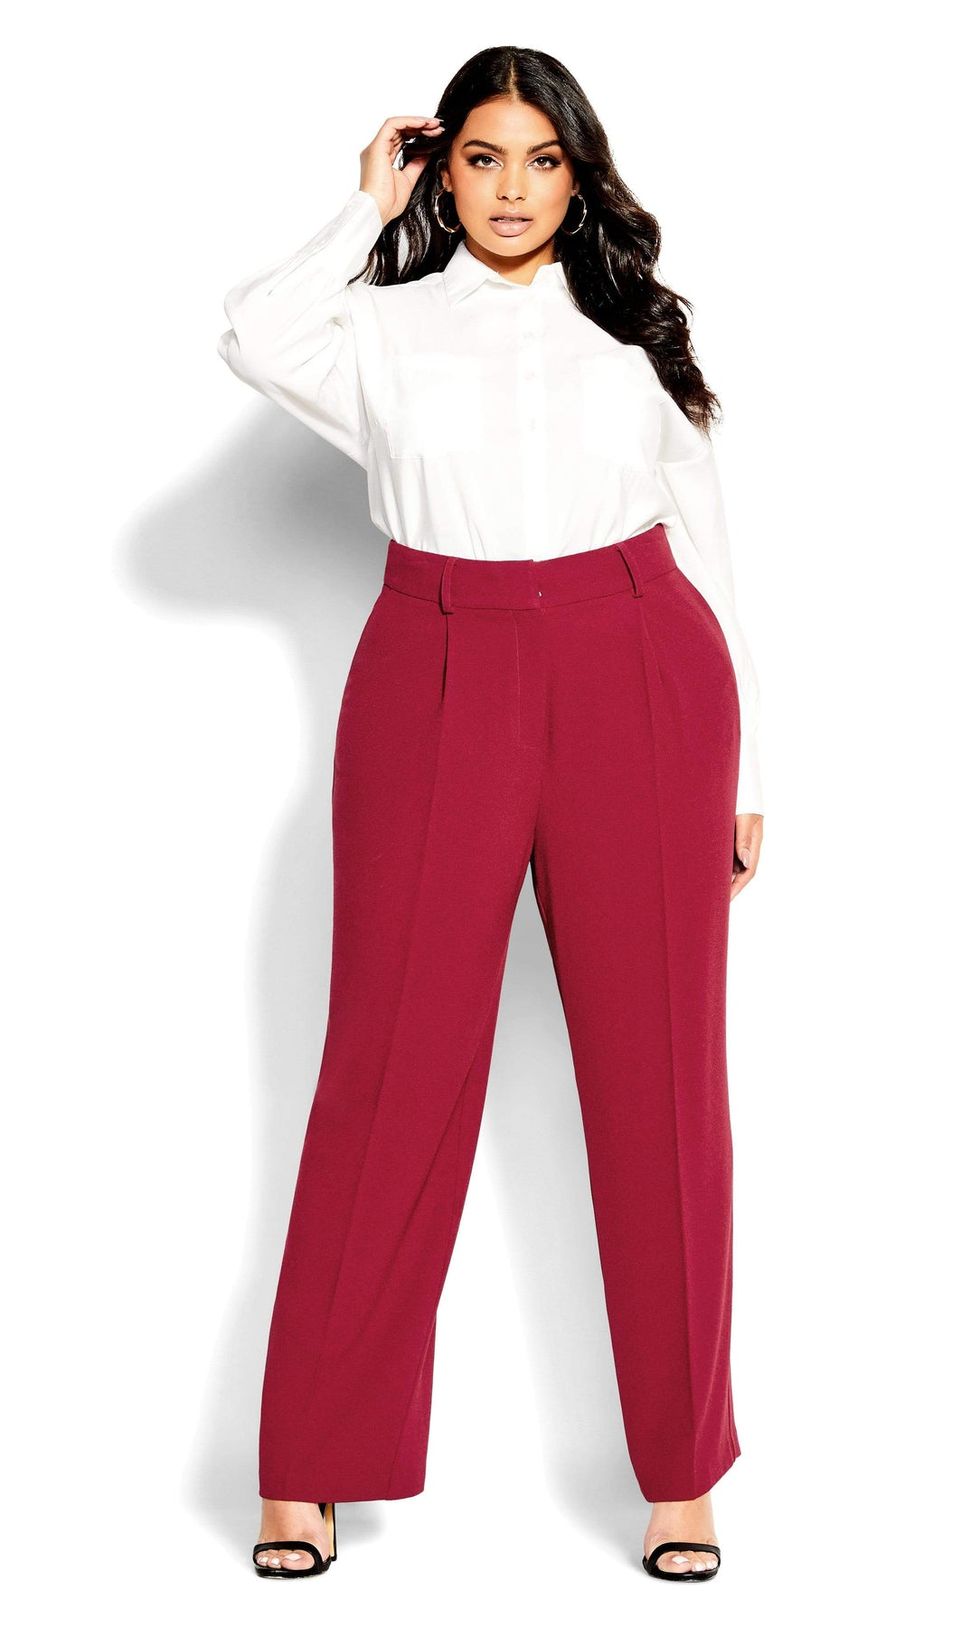 Do or don't: red pants  Red jeans outfit, Red pants outfit, Red